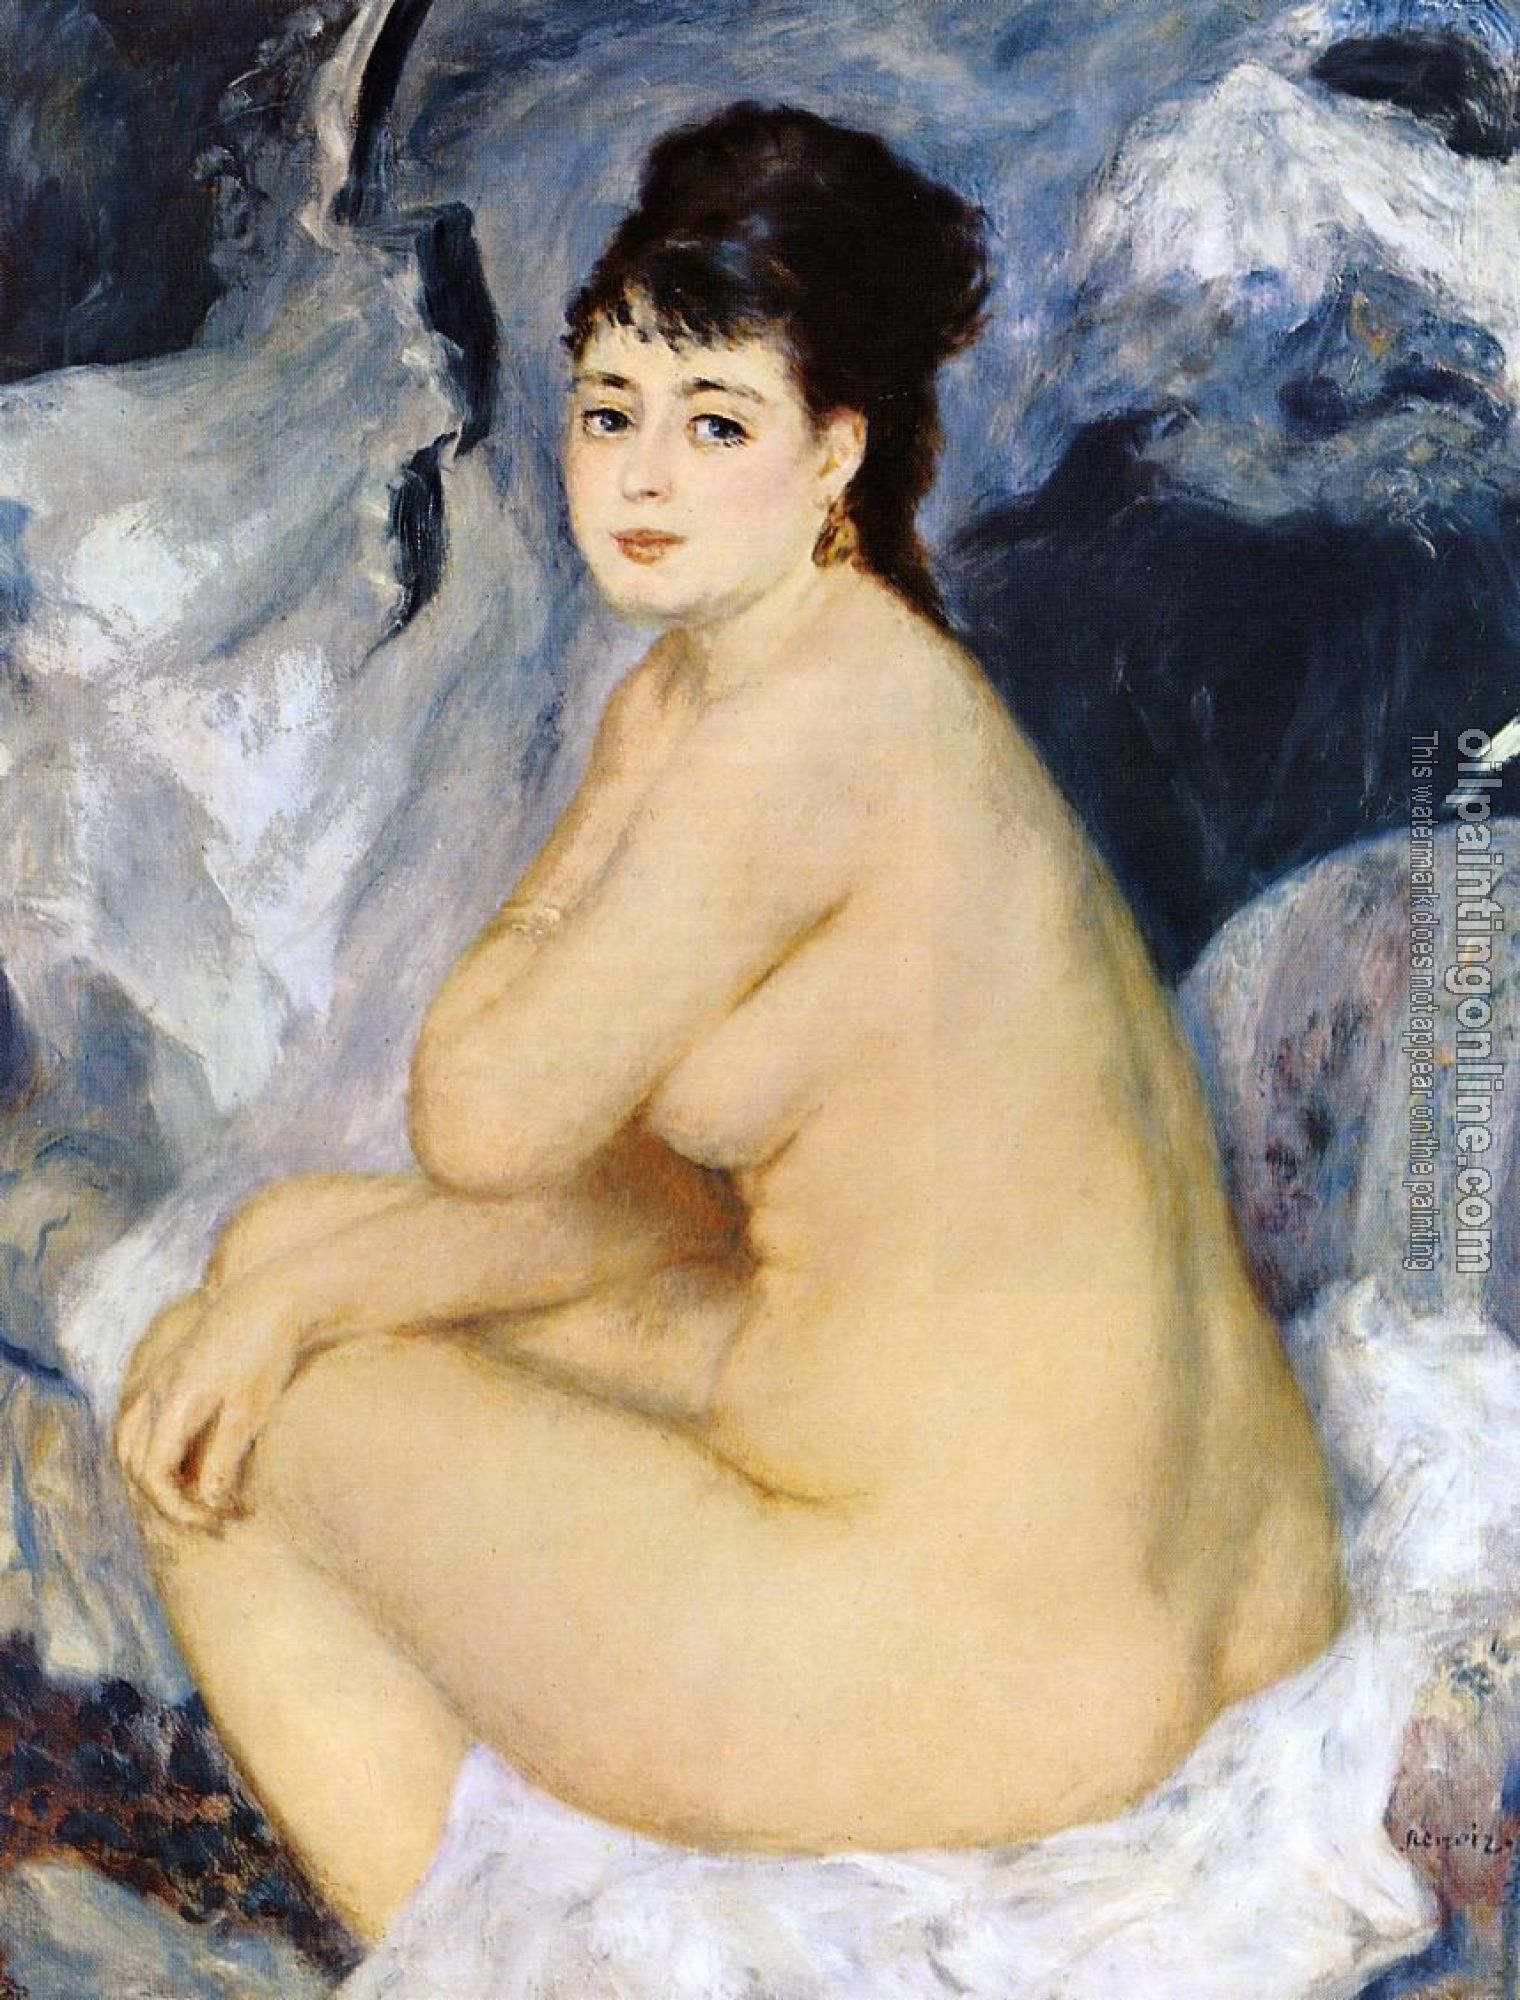 Renoir, Pierre Auguste - Nude Seated on a Sofa